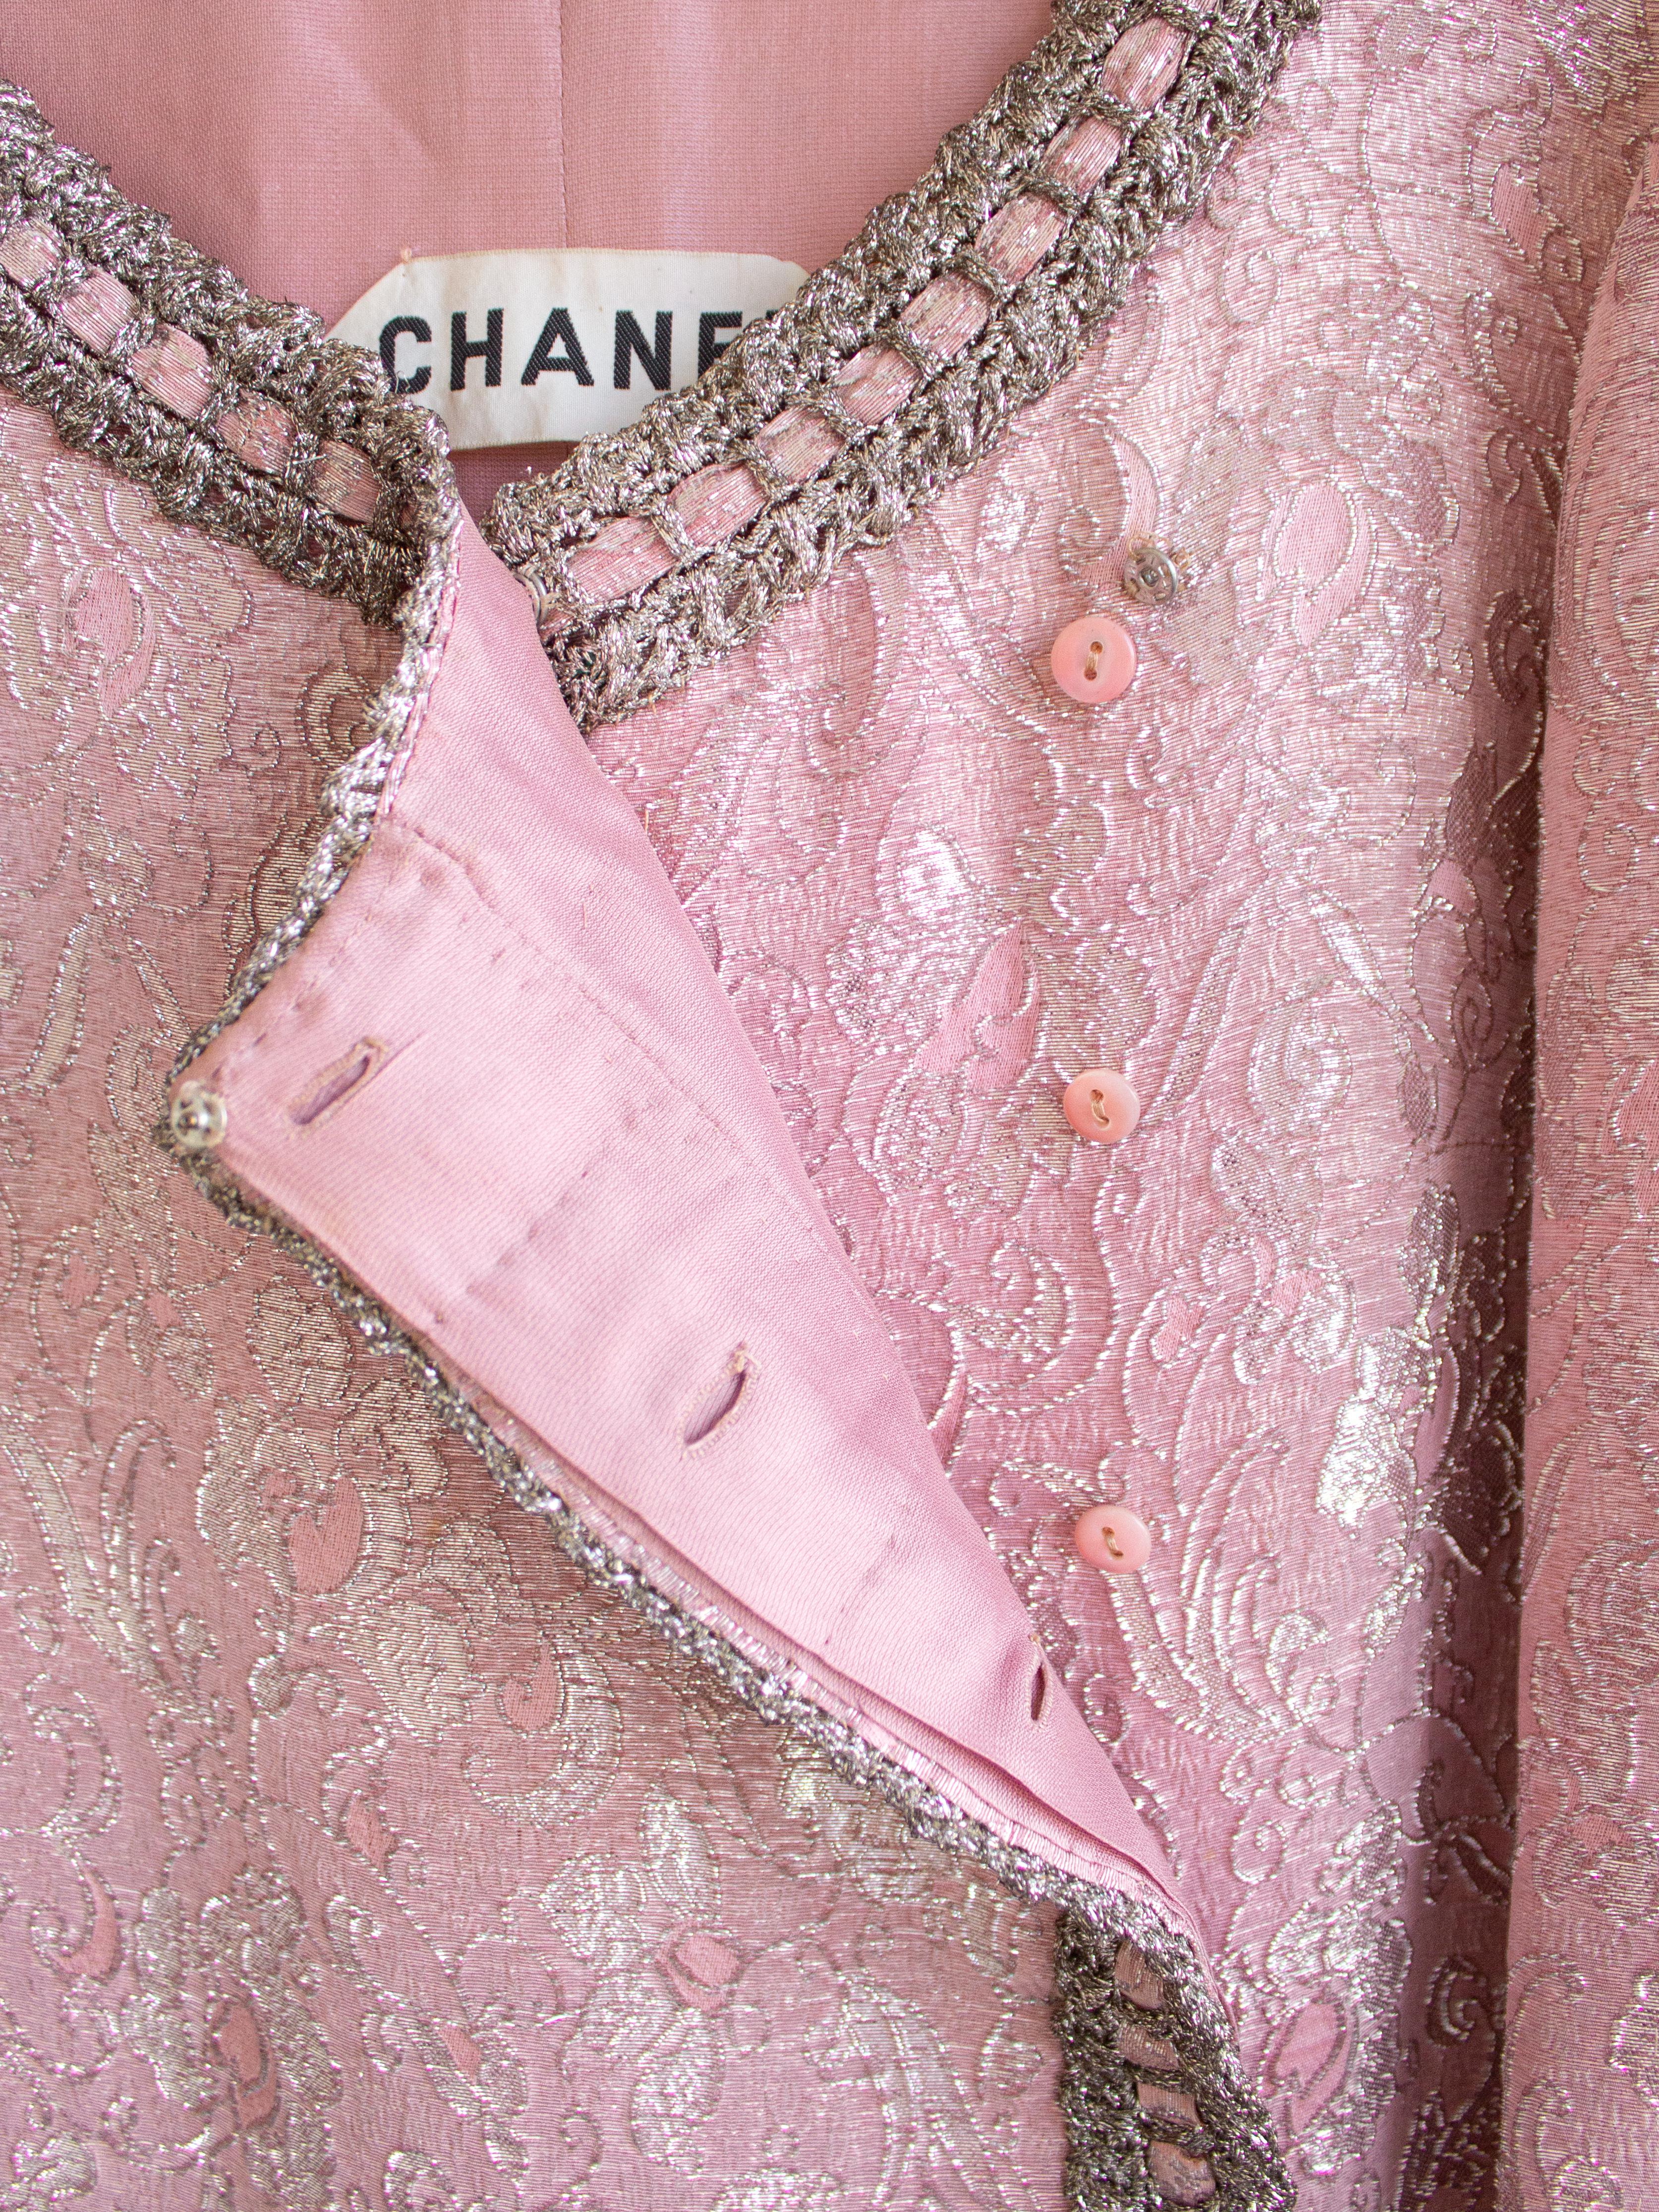 Chanel Vintage Haute Couture 1960s Pink Silver Braided Brocade Jacket Skirt Suit 6